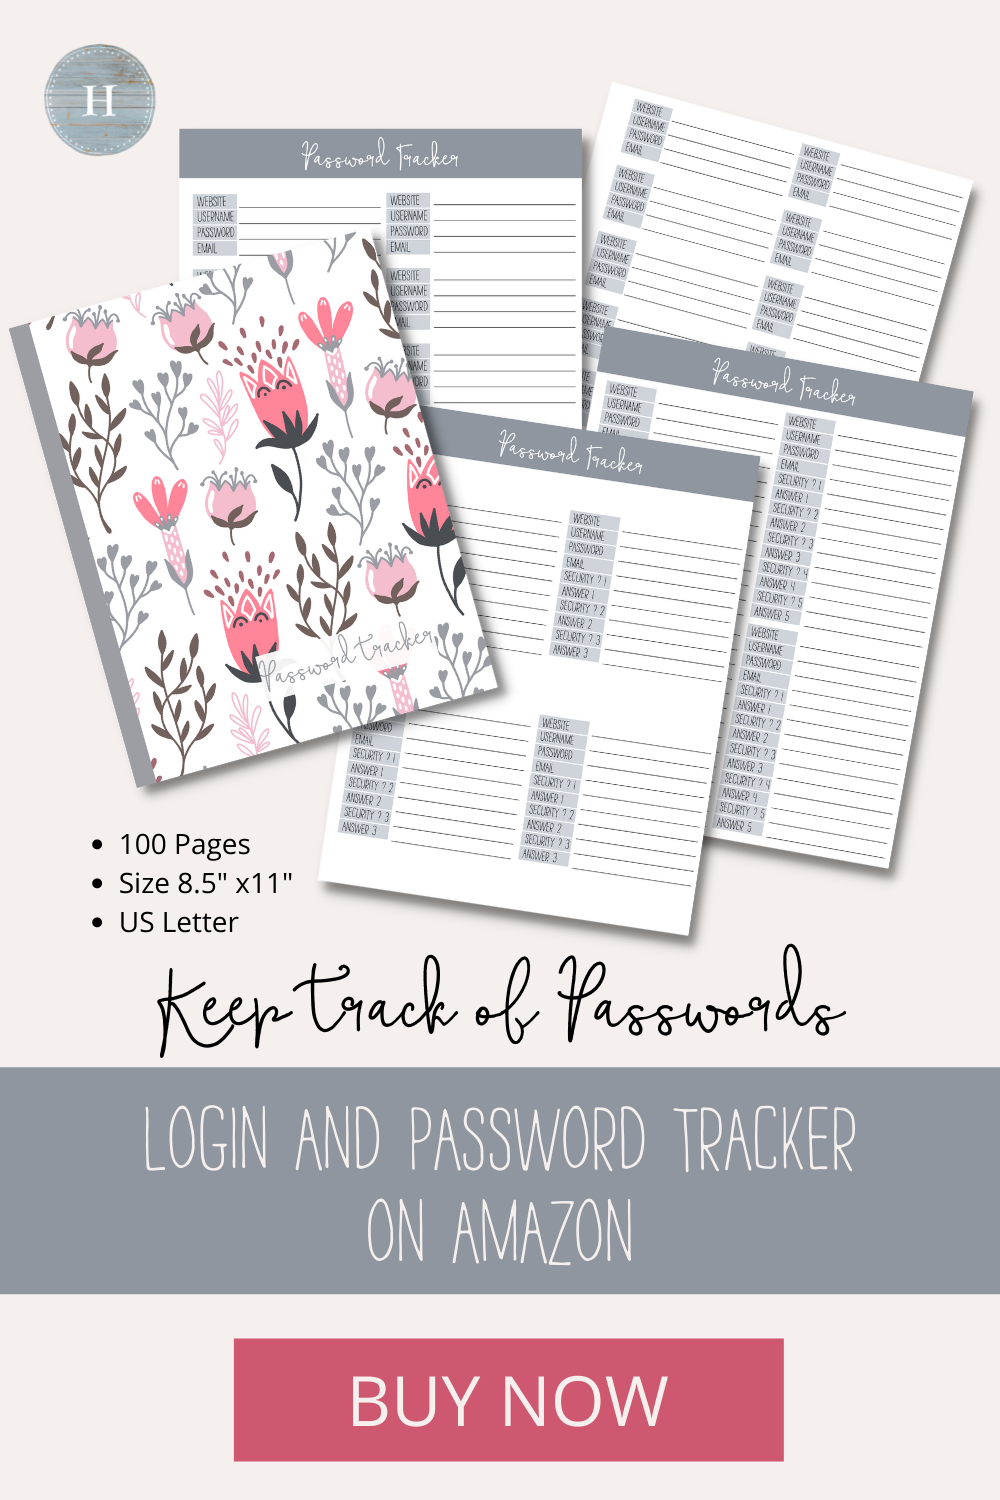 Tired of forgetting all those internet passwords and logins? This cute password trackers are the perfect gifts for grandparents. Available in a large 8.5" x 11" US Letter size, this password log book is perfect for not only keeping track of passwords, but there are pages to track security questions and answers. This is NOT a printable book, you can snag this on Amazon and finally get those passwords organized!